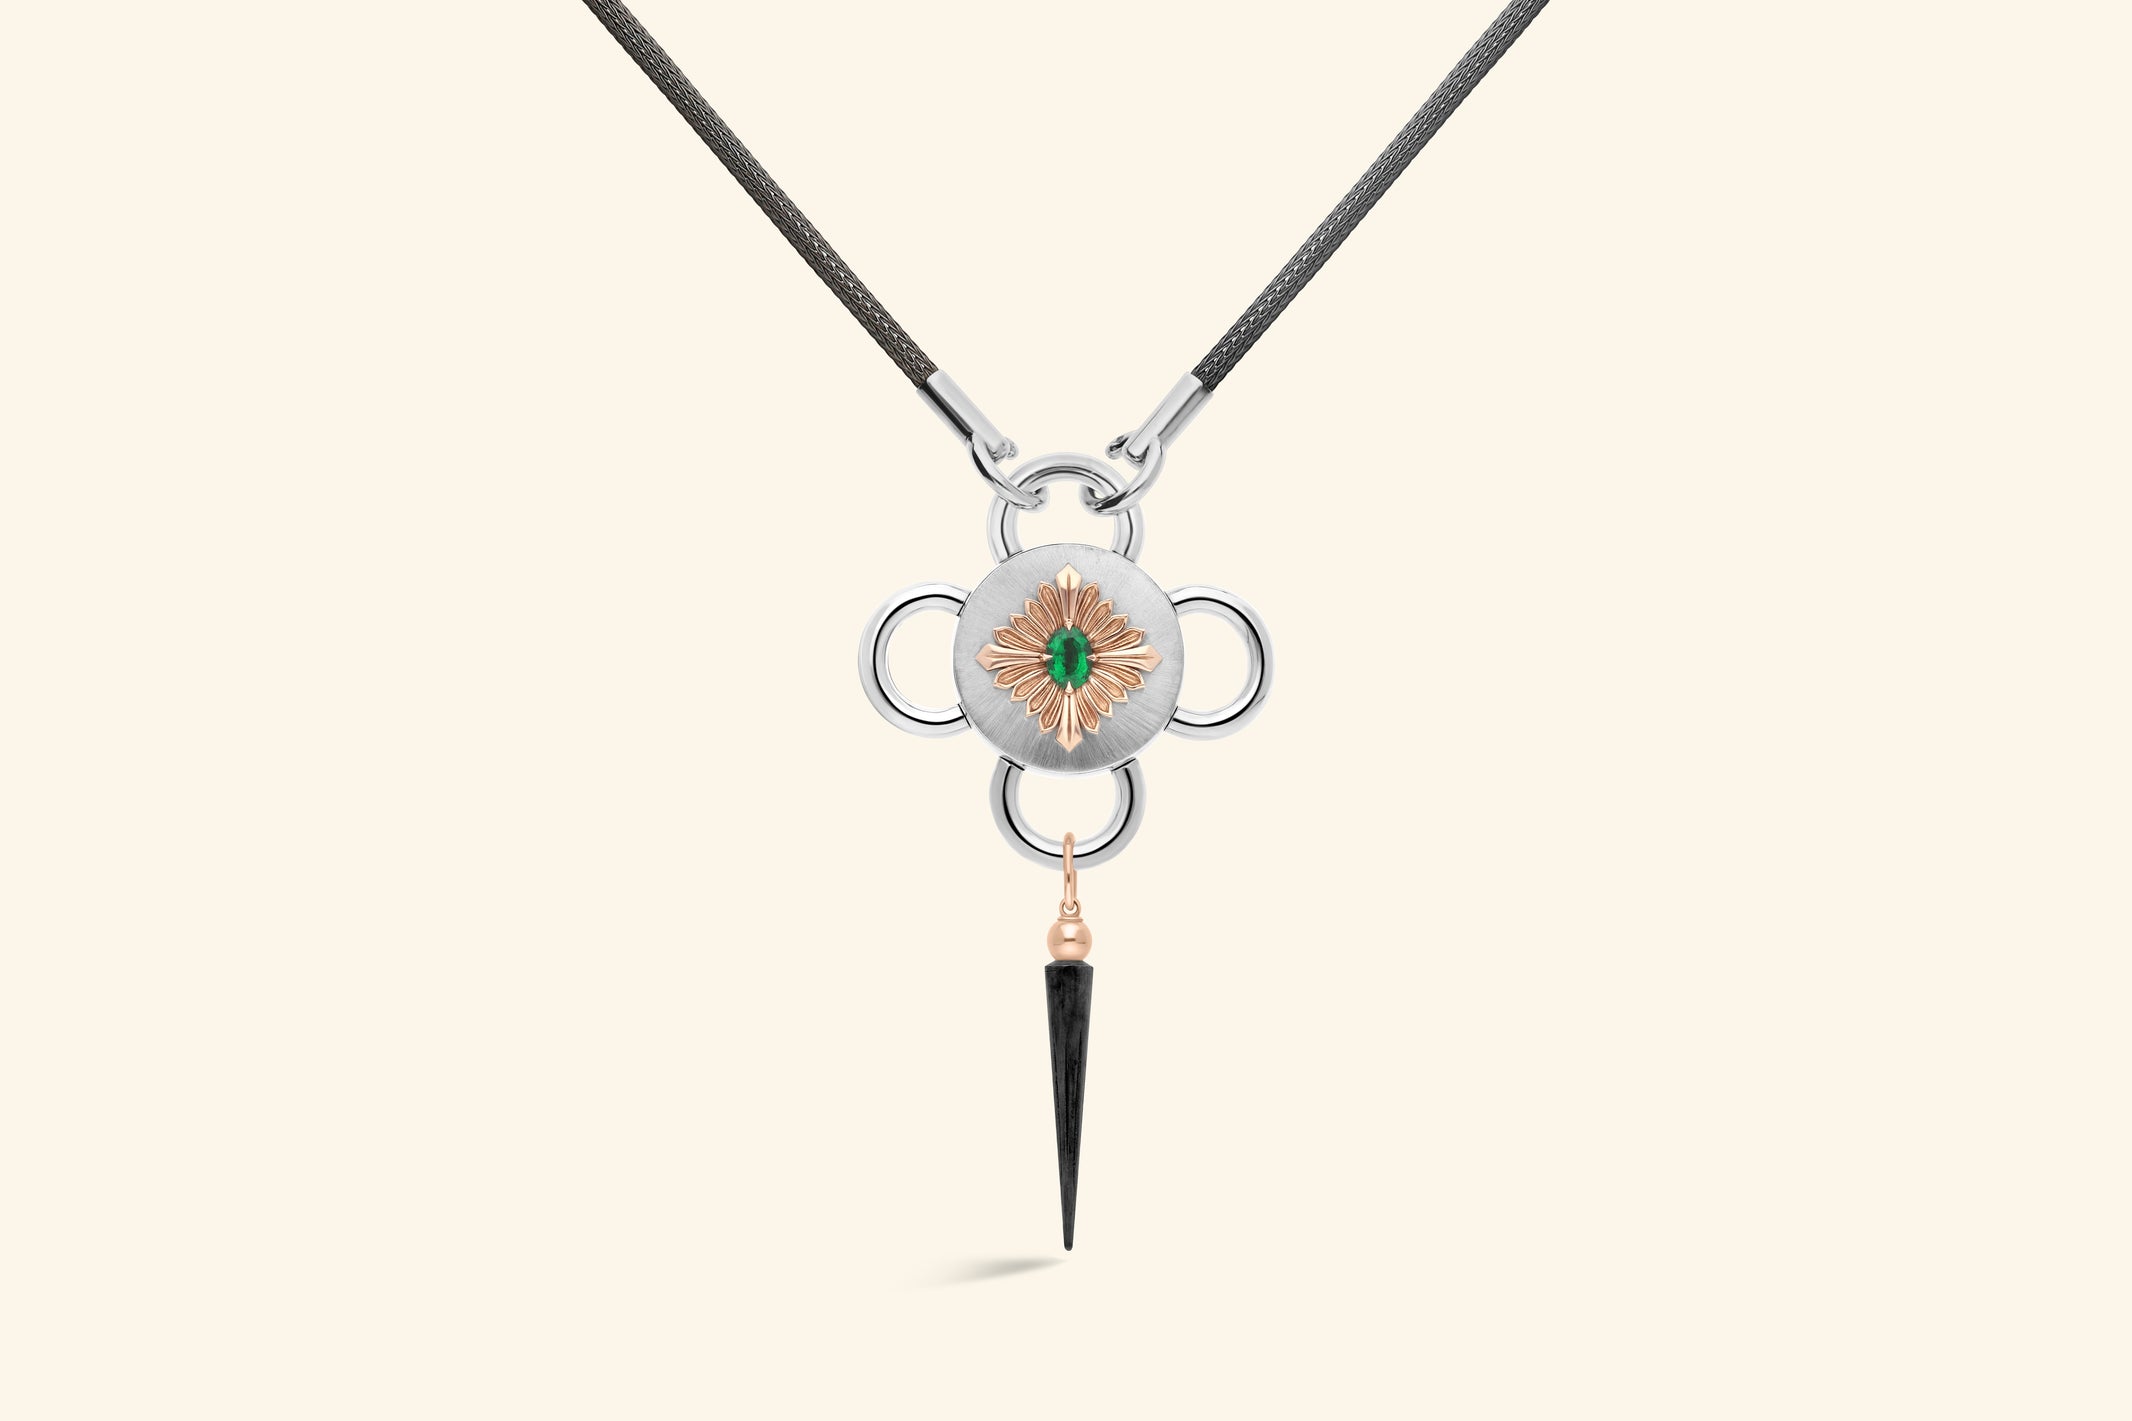 Bolt necklaceA ~0.80 carat emerald set with a polished rose gold flower, itself set on a satin-finish silver disk . A tassel in rose gold and blackened silver. Knitted chain in blackened silver.